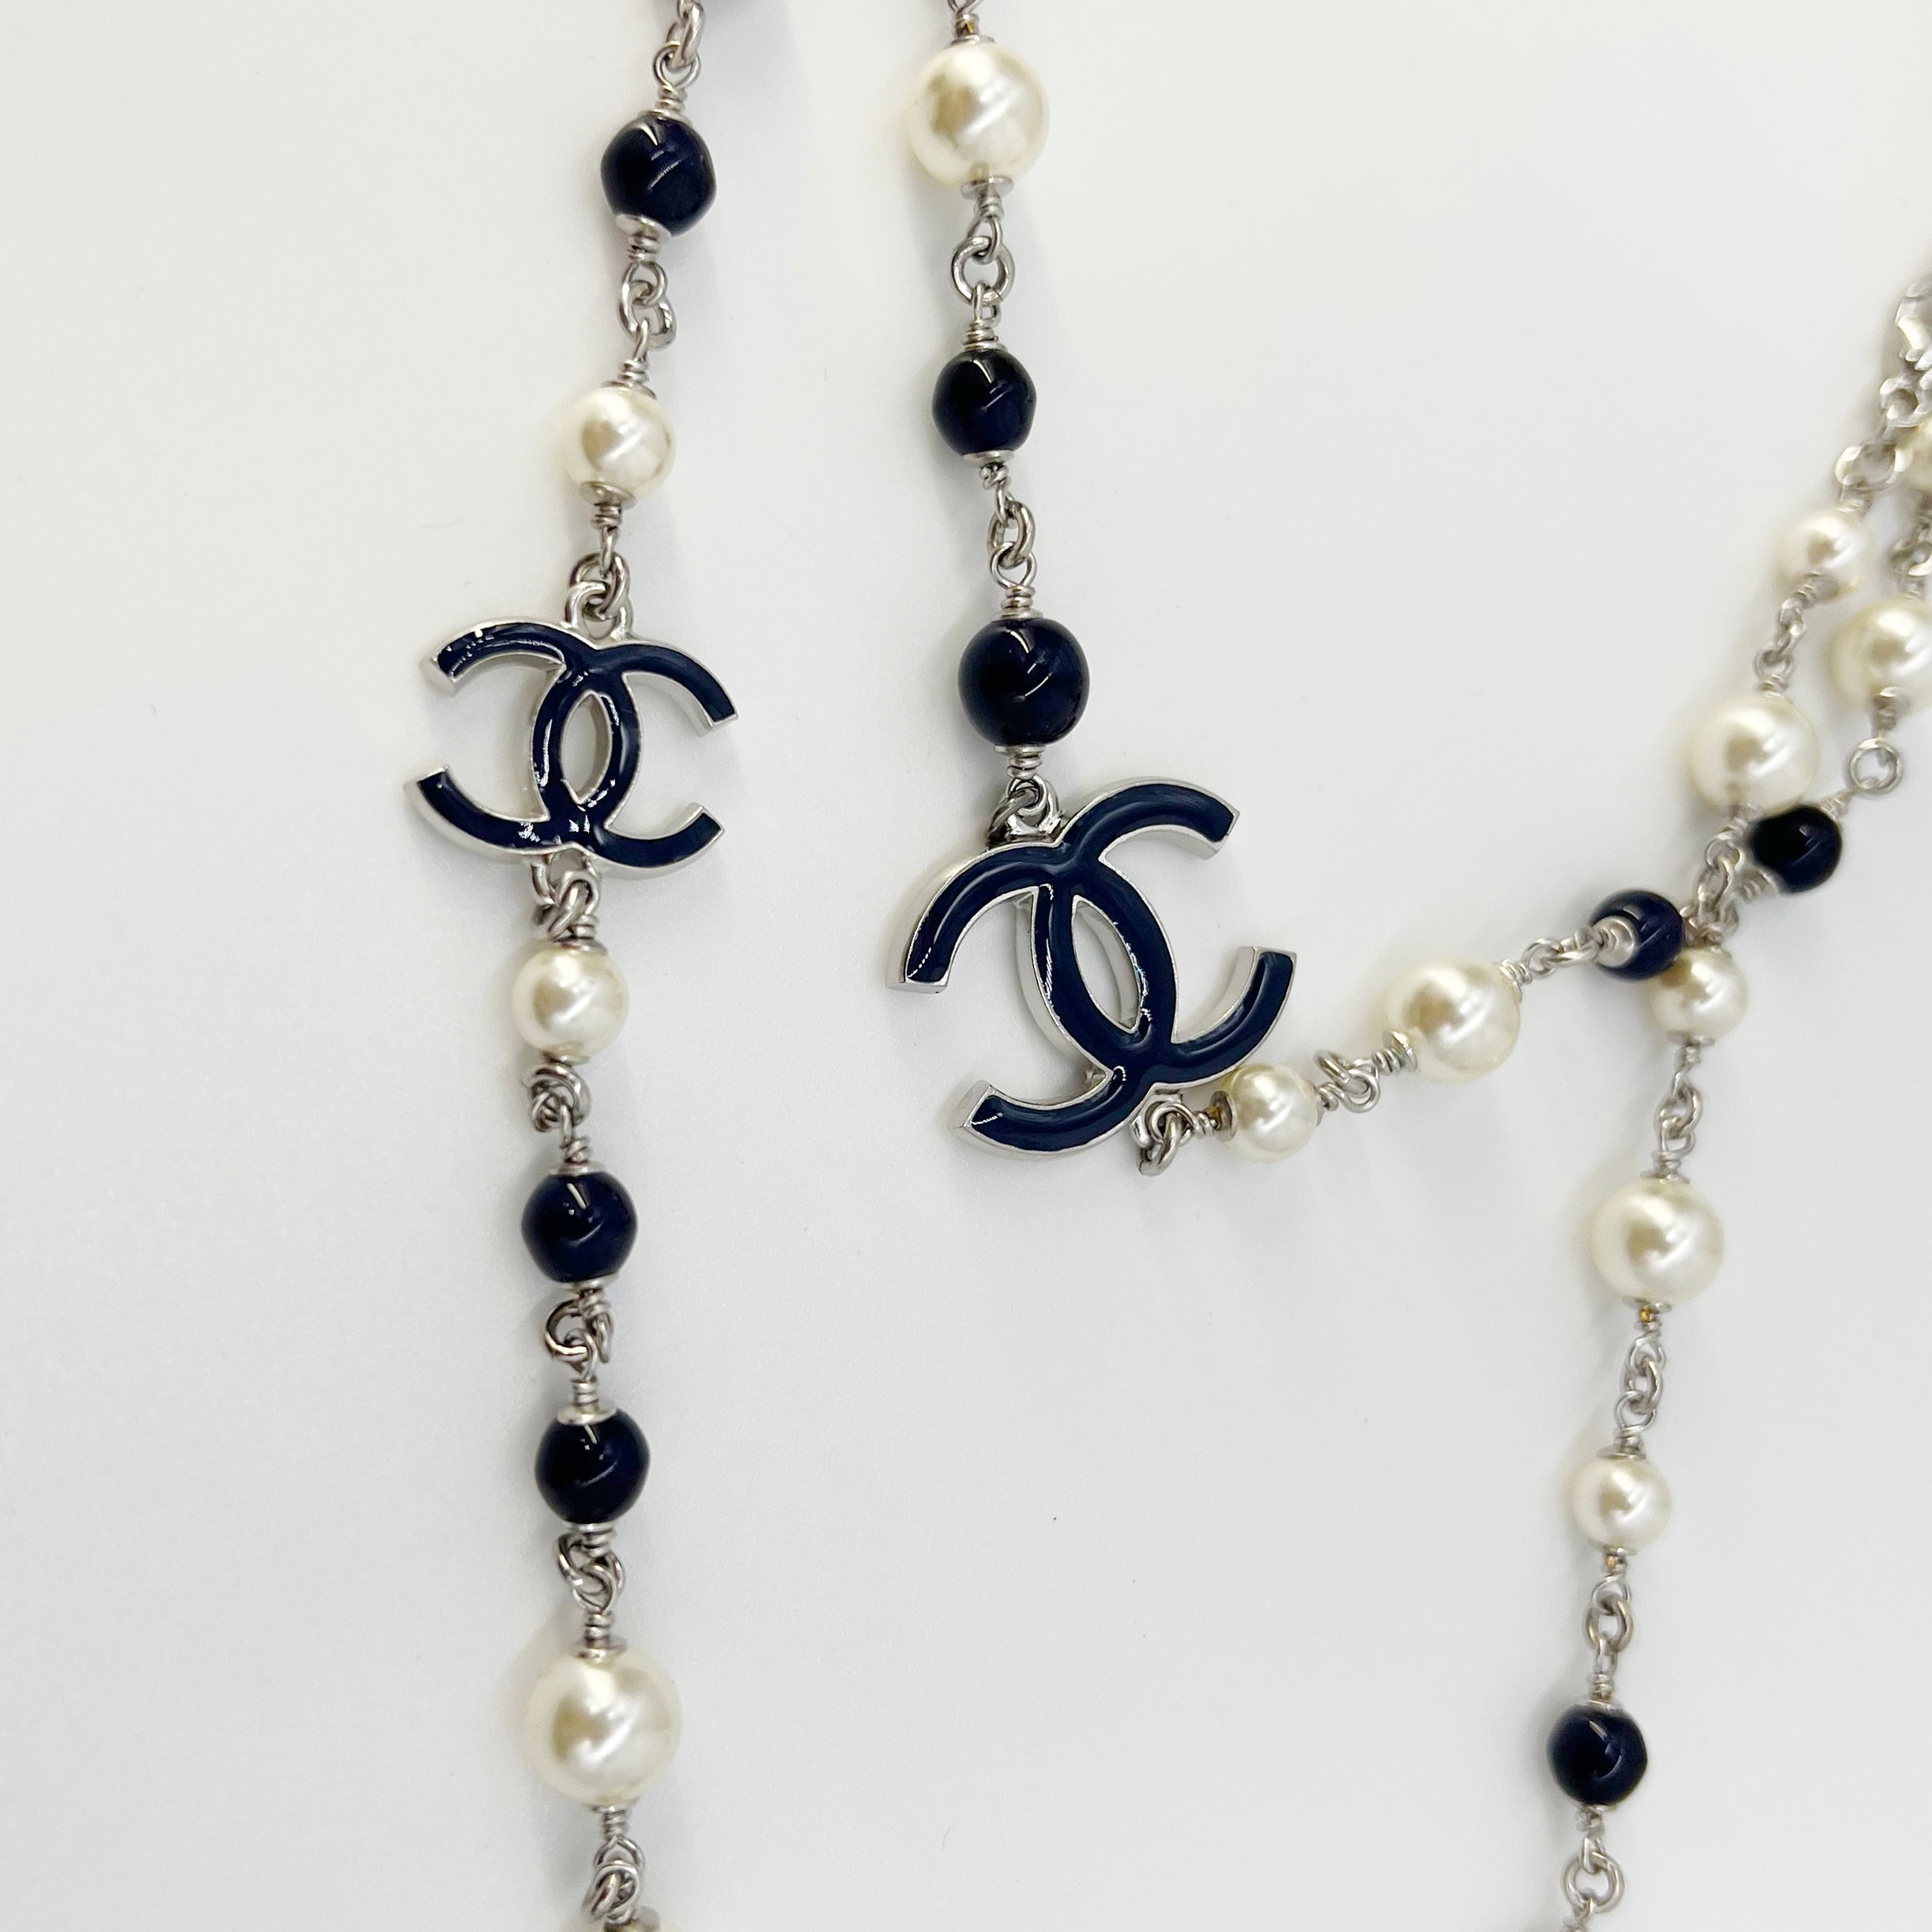 Chanel Pearl Necklace/Belt  Chanel jewelry necklace, Chanel pearl necklace,  Chanel earrings